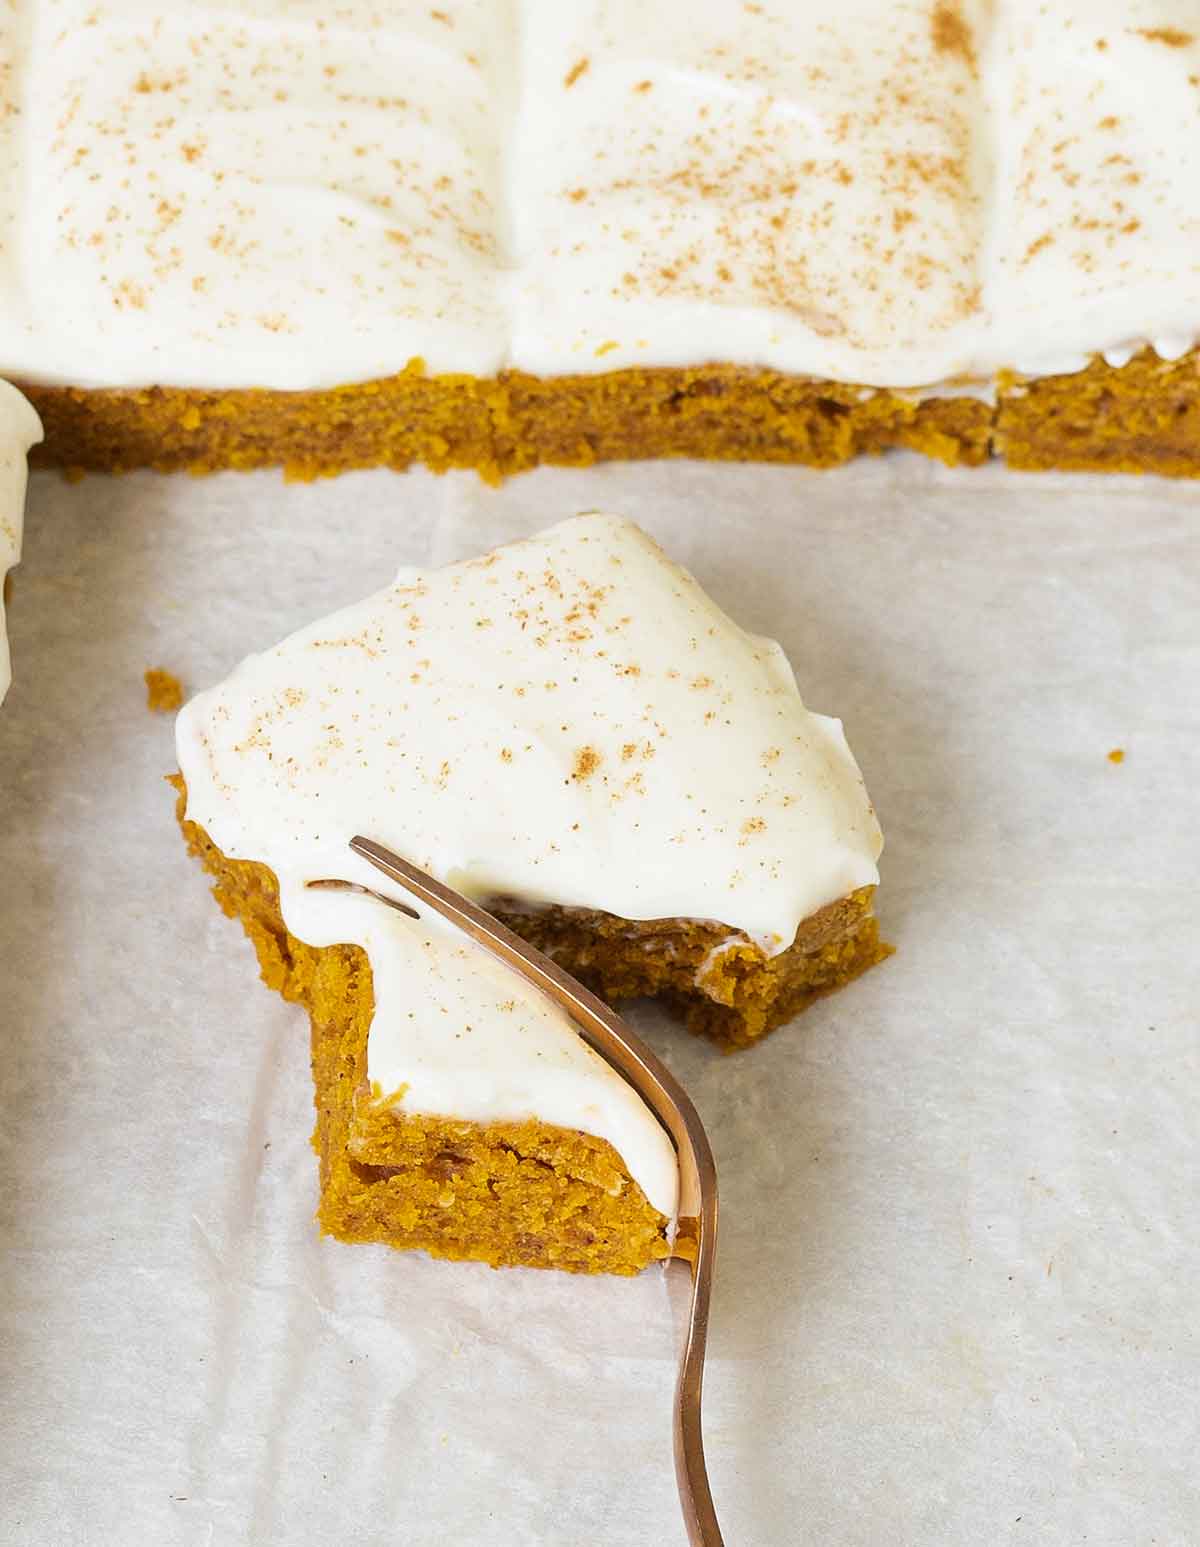 Eating a slice of the Pumpkin Squares with a fork.